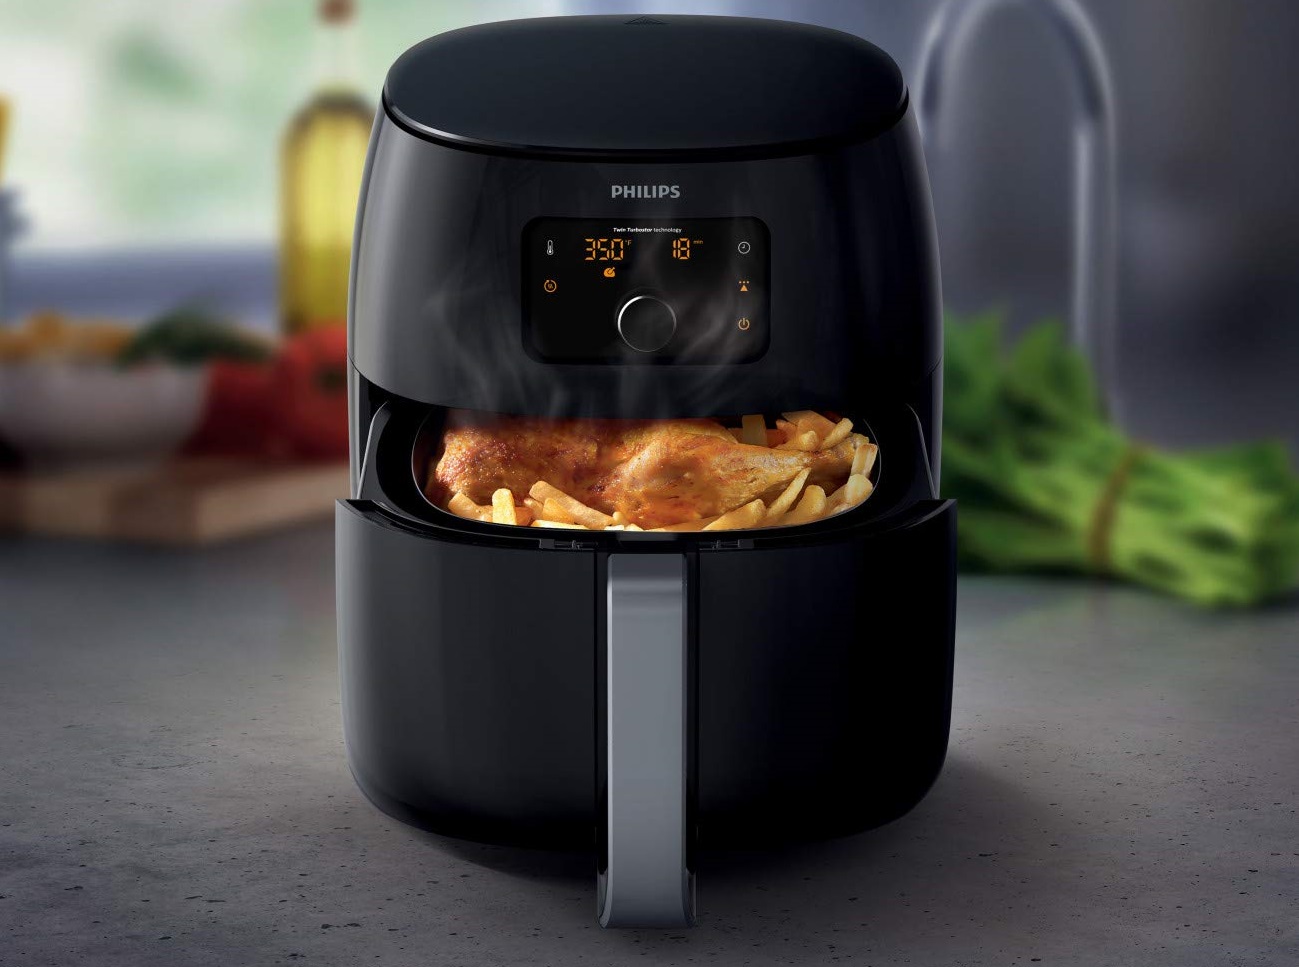 A black Philips Digital Twin TurboStar Air Fryer XXL containing air-fried chicken and french fries.